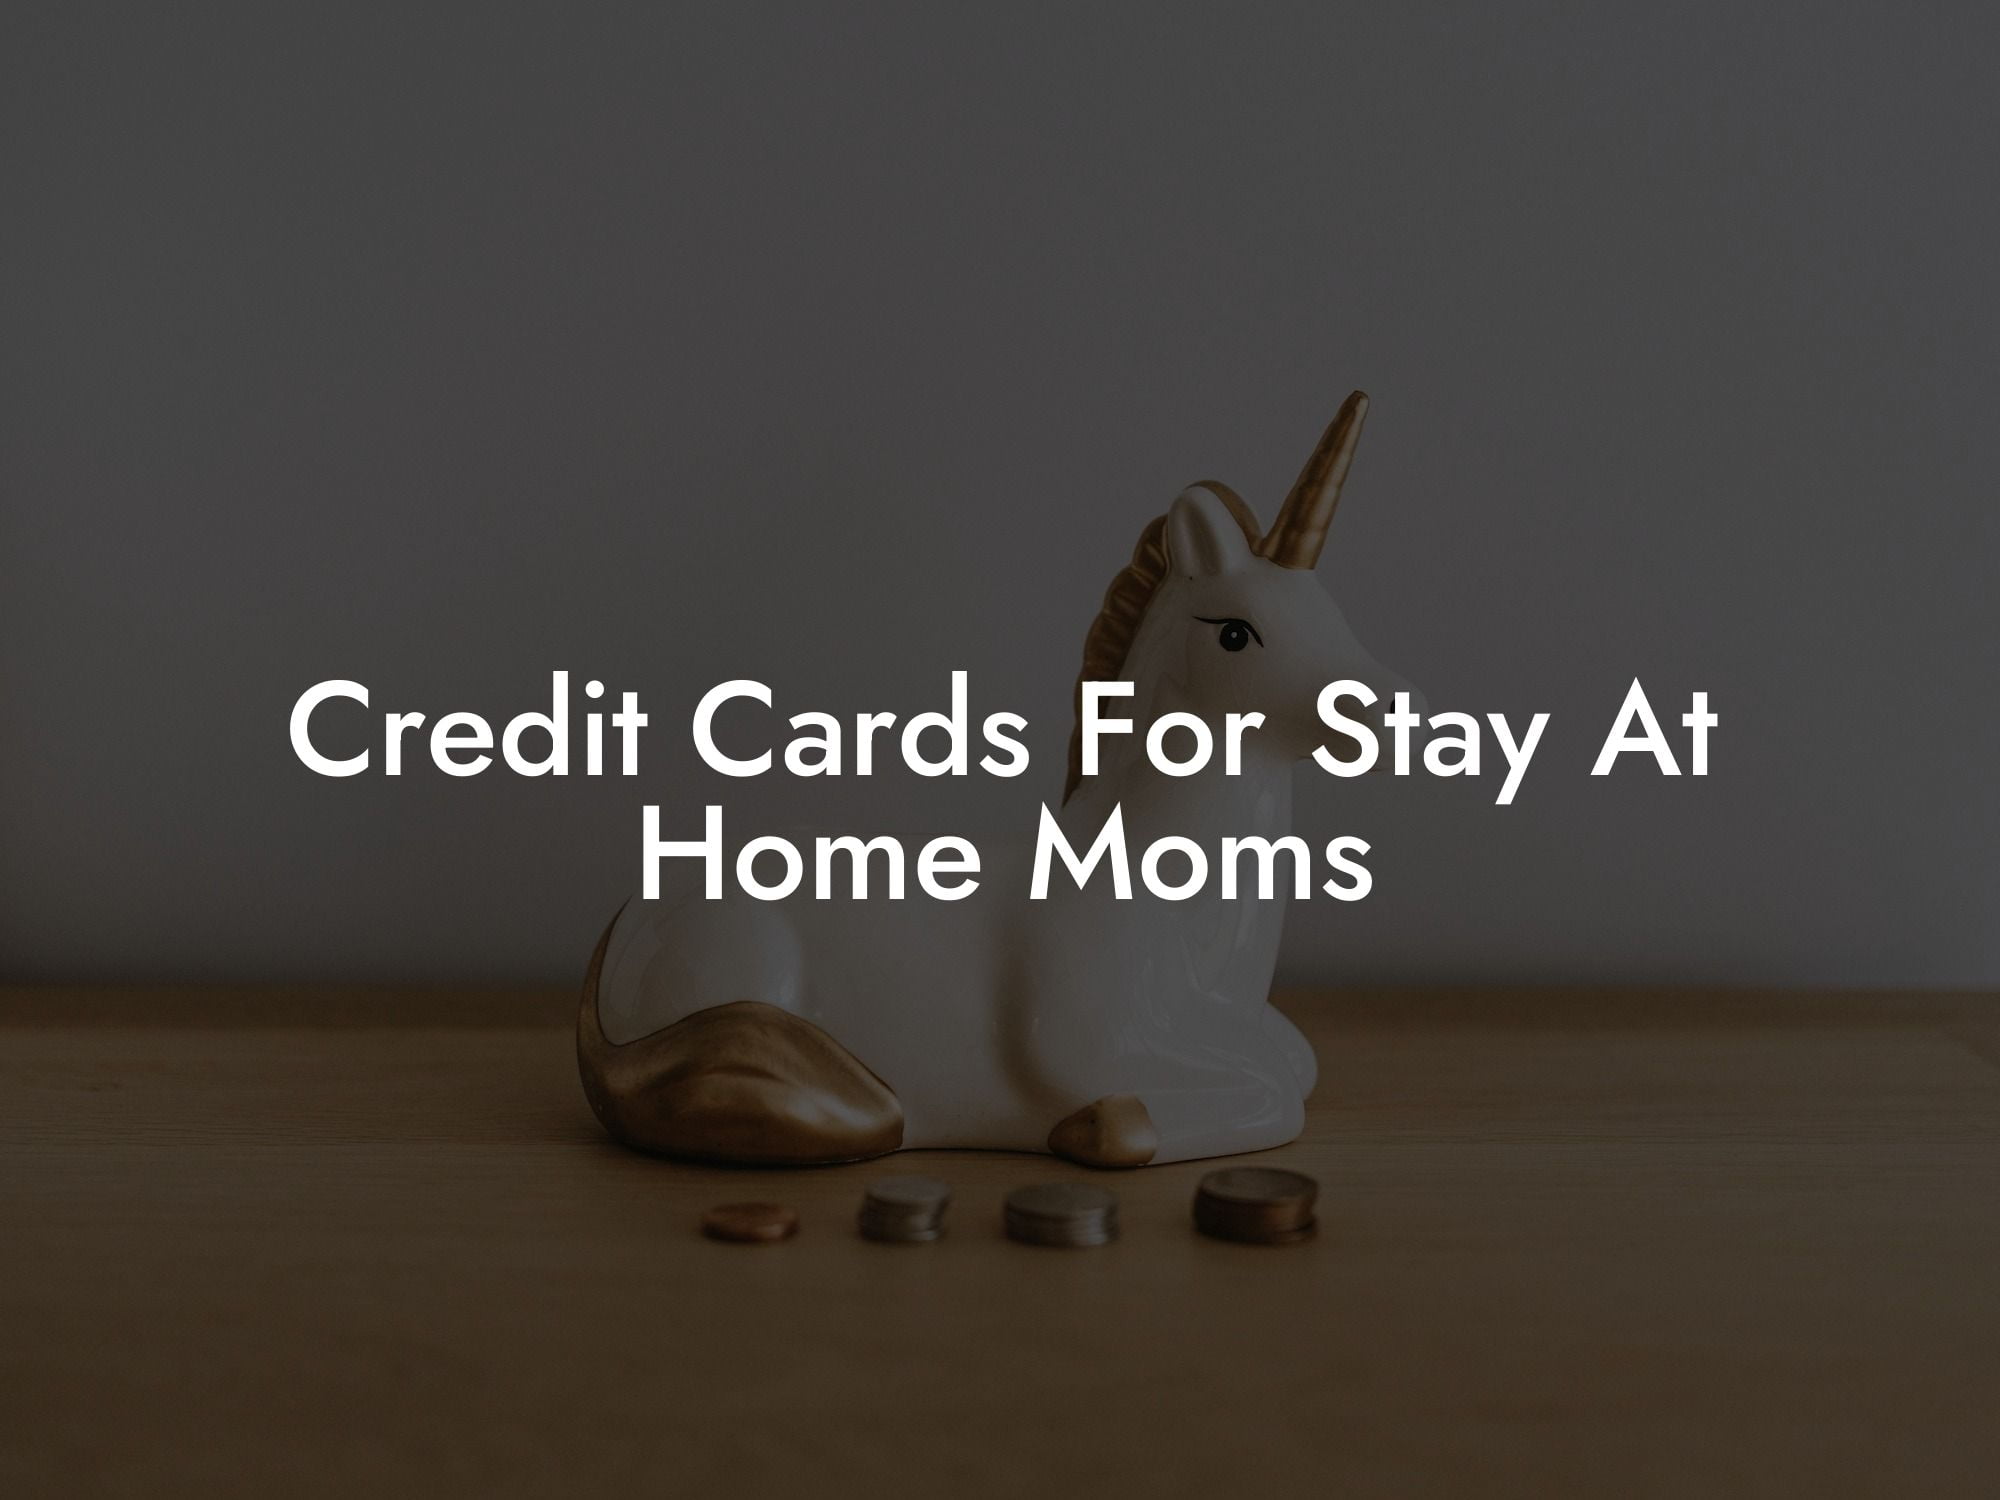 Credit Cards For Stay At Home Moms